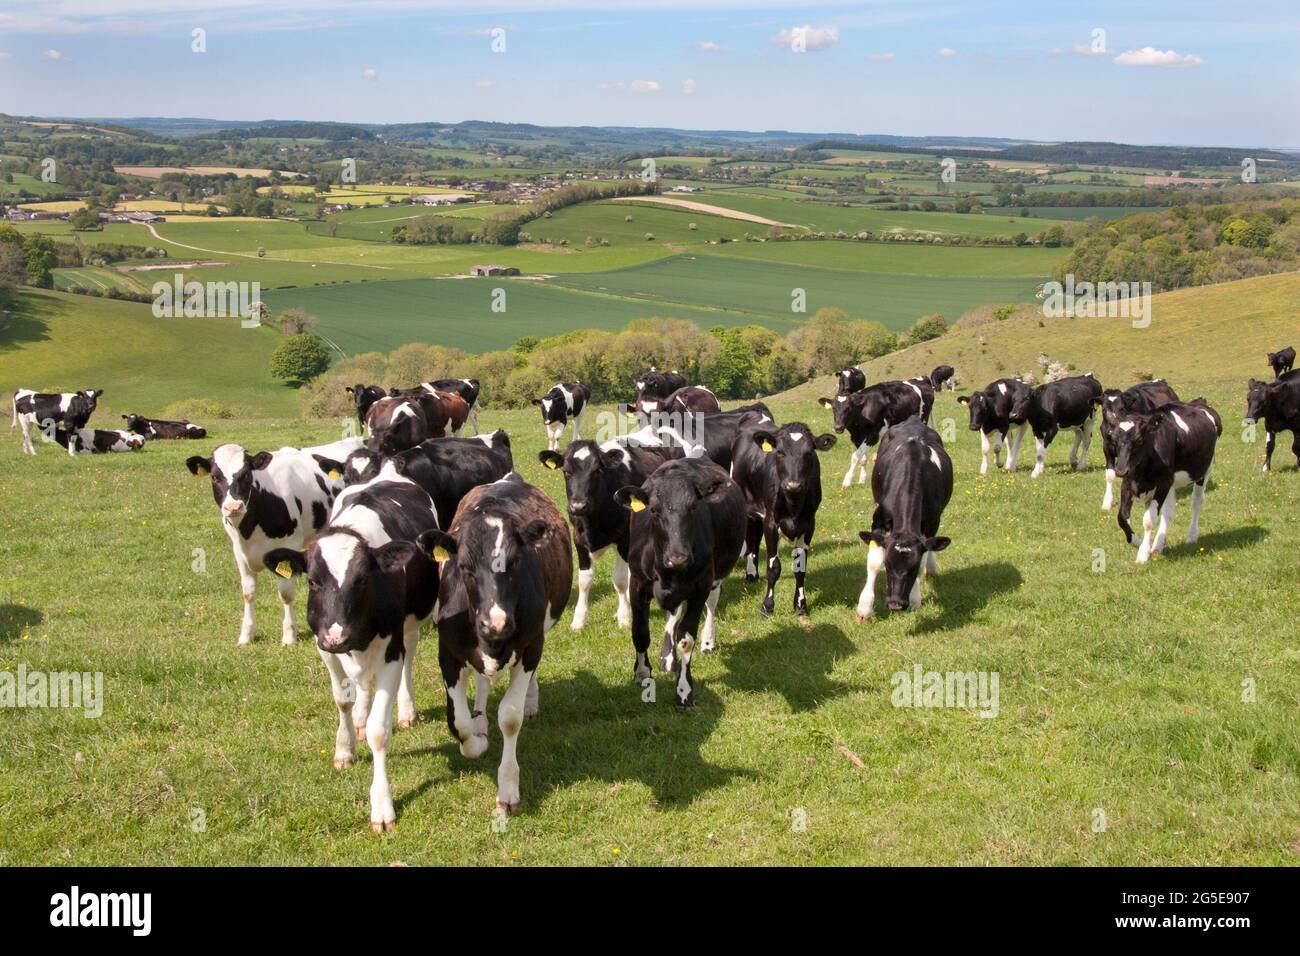 cattle grazing near Tollard Royal Carlton Downs with views to Ashcombe & Quarry Bottom, nr Shaftesbury, Wiltshire, England Stock Photo